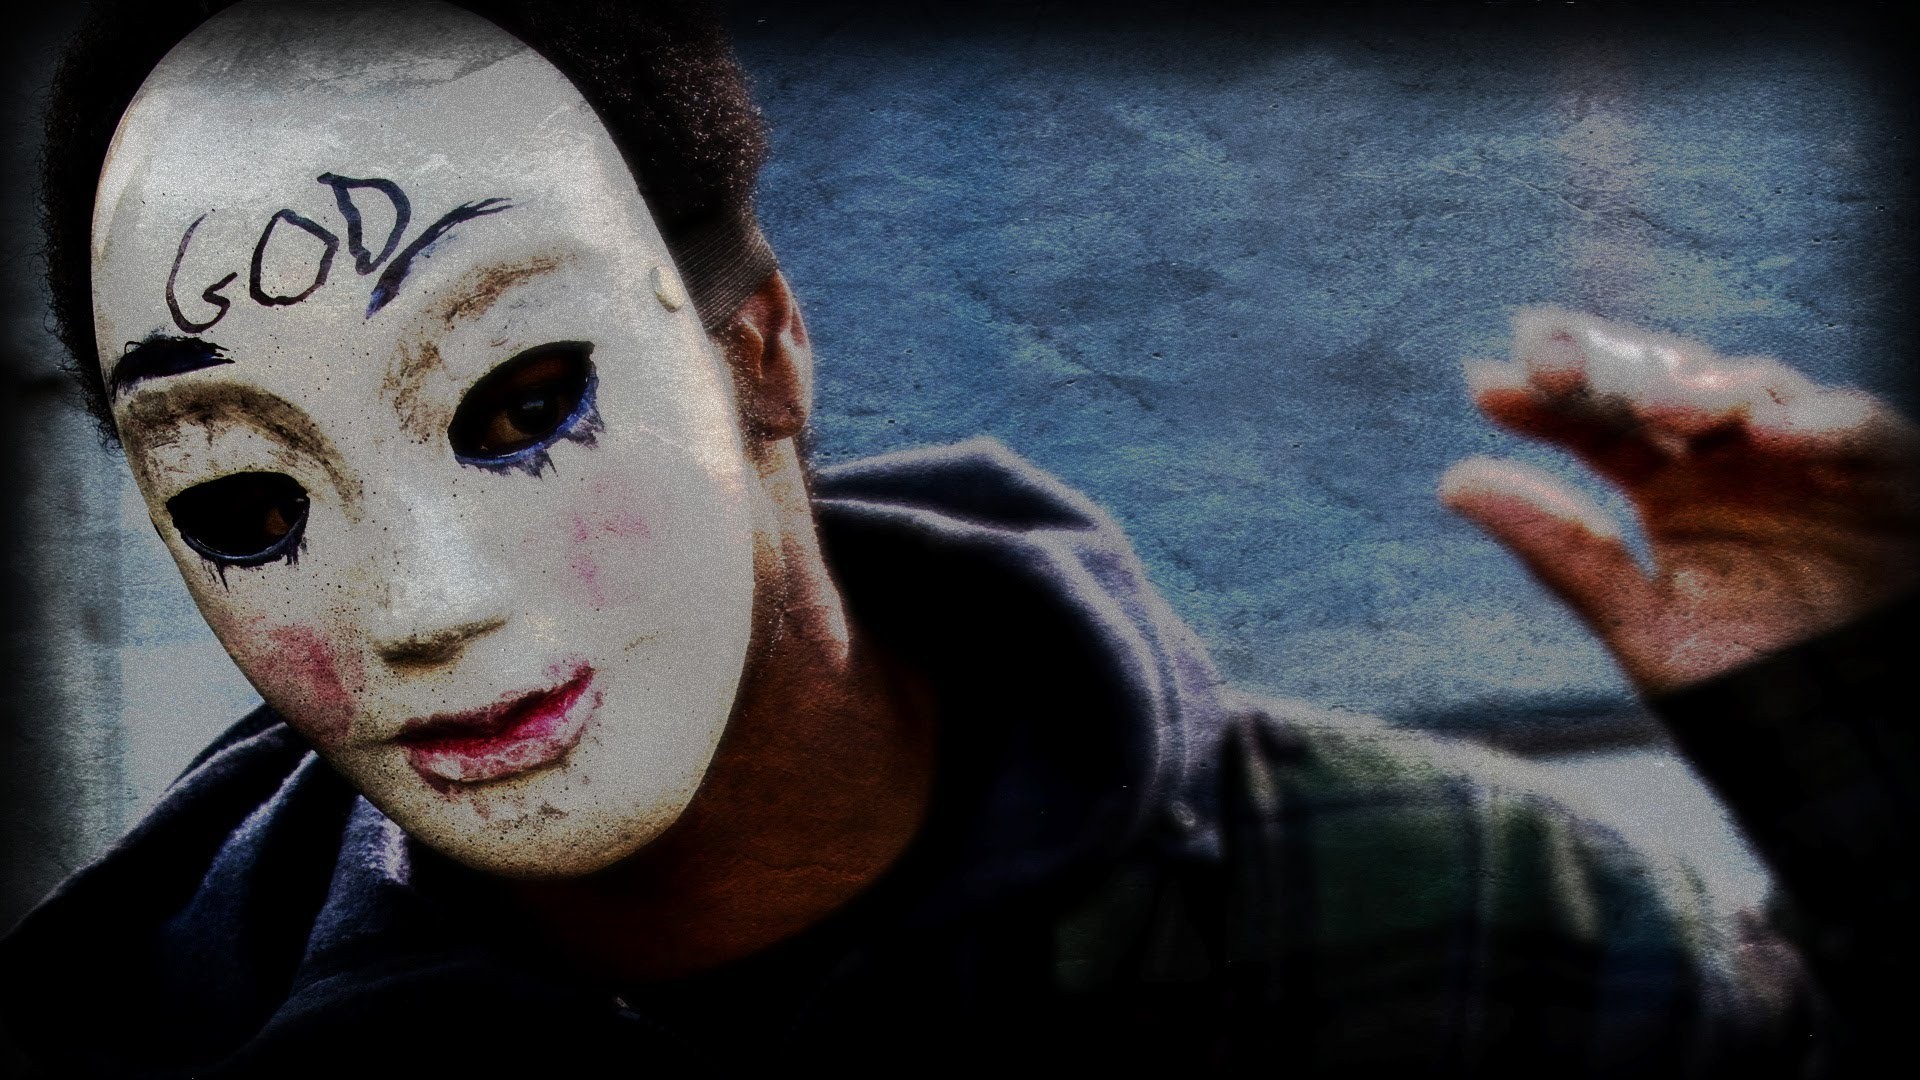 1920x1080 Hollywood Movies Wallpapers. Previous Wallpaper. The Purge ...